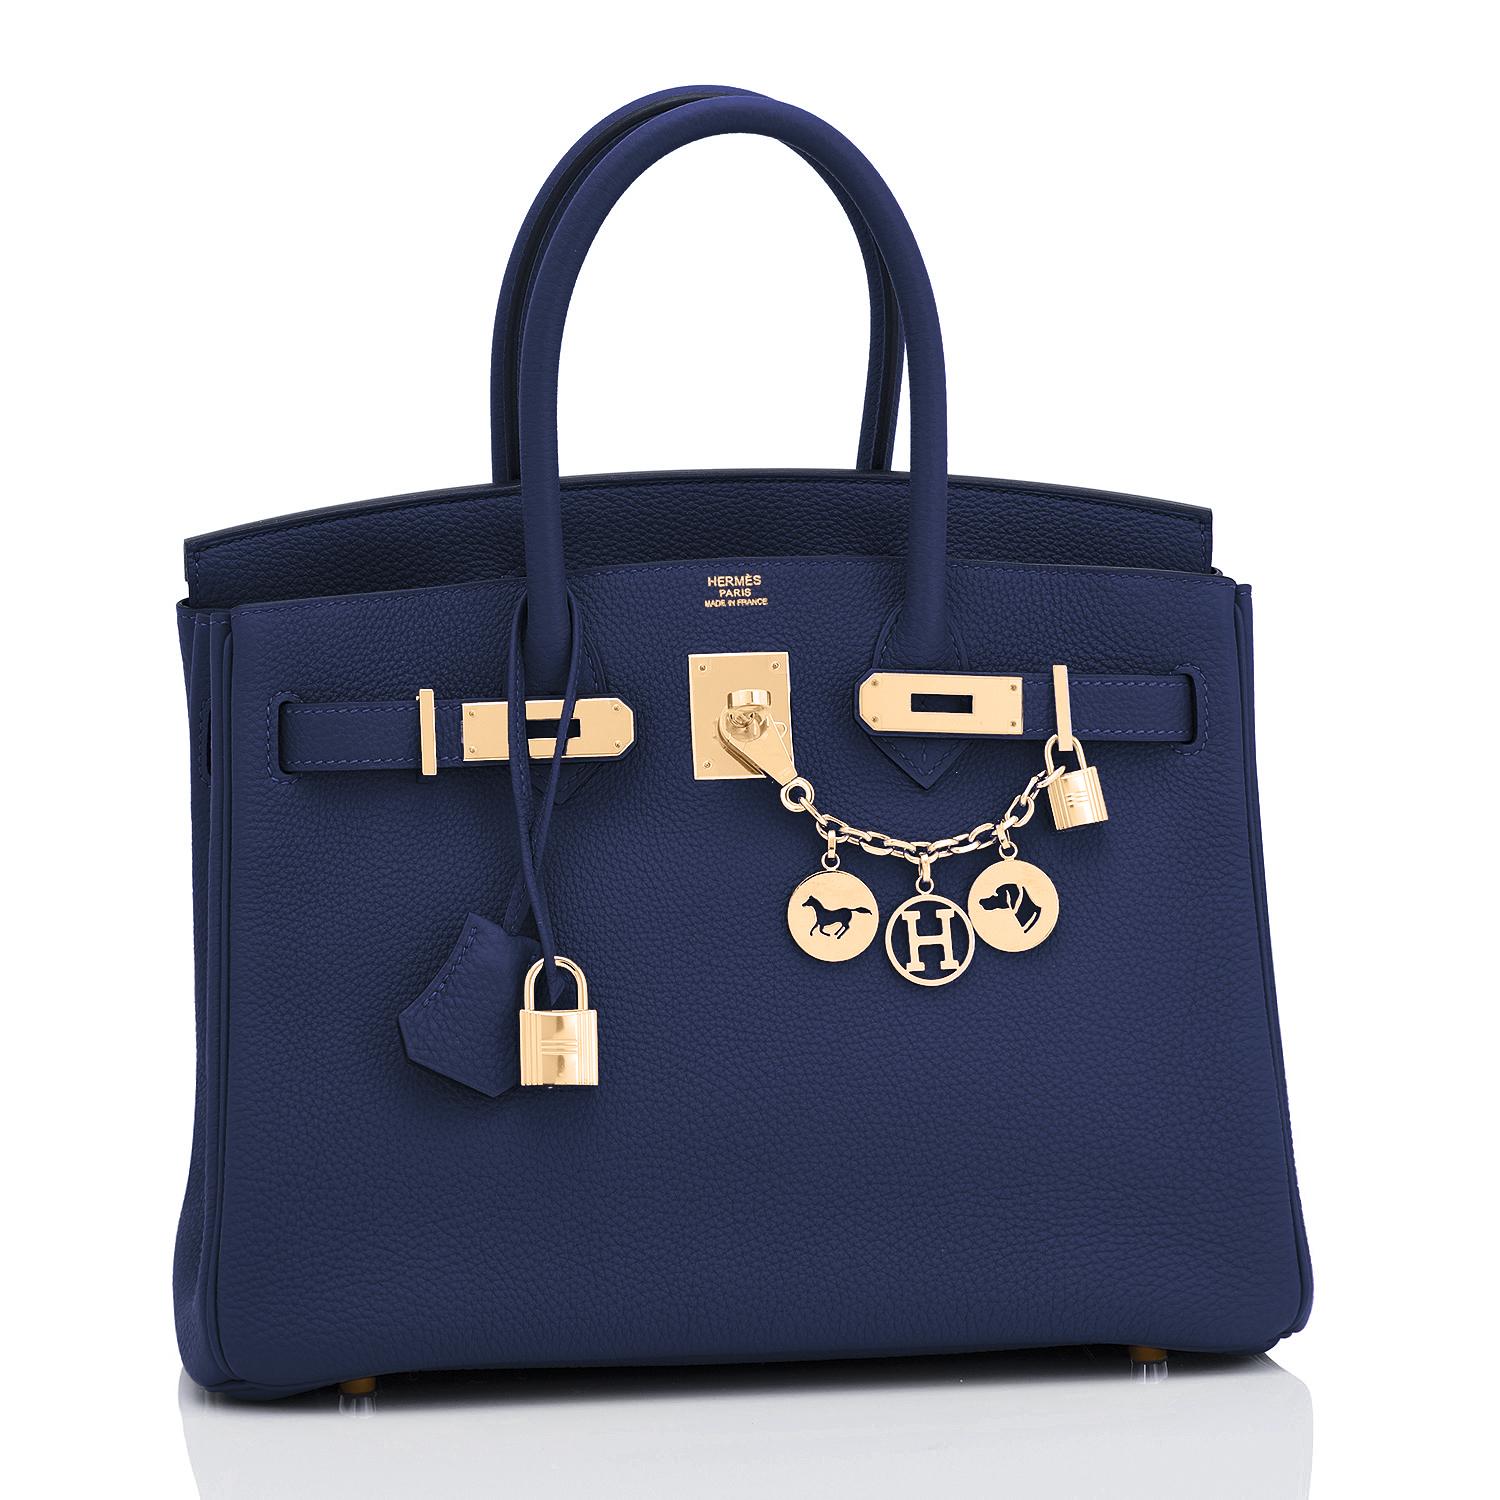 Hermes Bleu Nuit Deep Navy Birkin 30cm Togo Gold Bag Z Stamp, 2021
Devastatingly gorgeous! Ultimate gift!
Brand New in Box.  Store Fresh.  Pristine Condition (with plastic on hardware).
Just purchased from Hermes store! Bag bears new interior 2021 Z